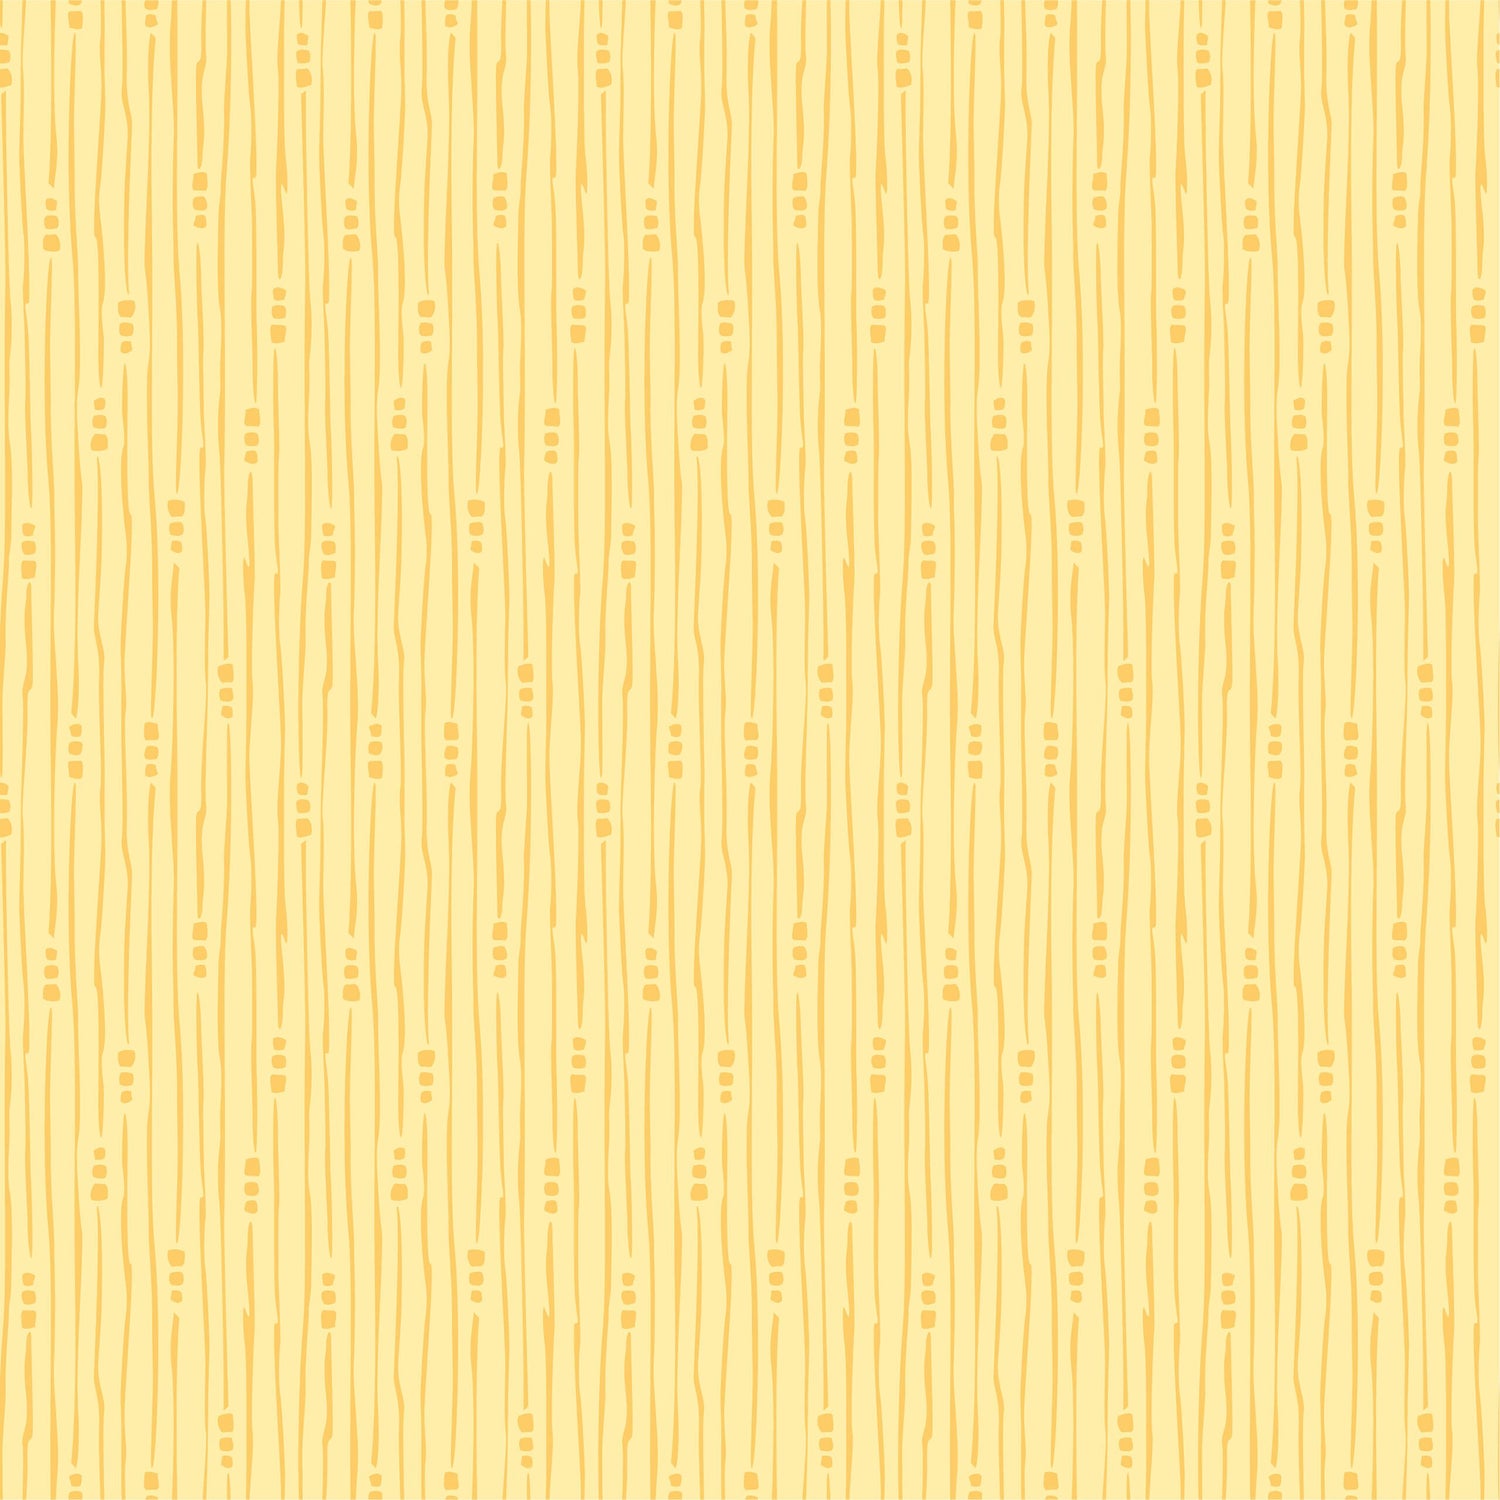 Hollyhock Lane Rain Yellow by Sheri McCulley for Poppie Cotton - HL23811